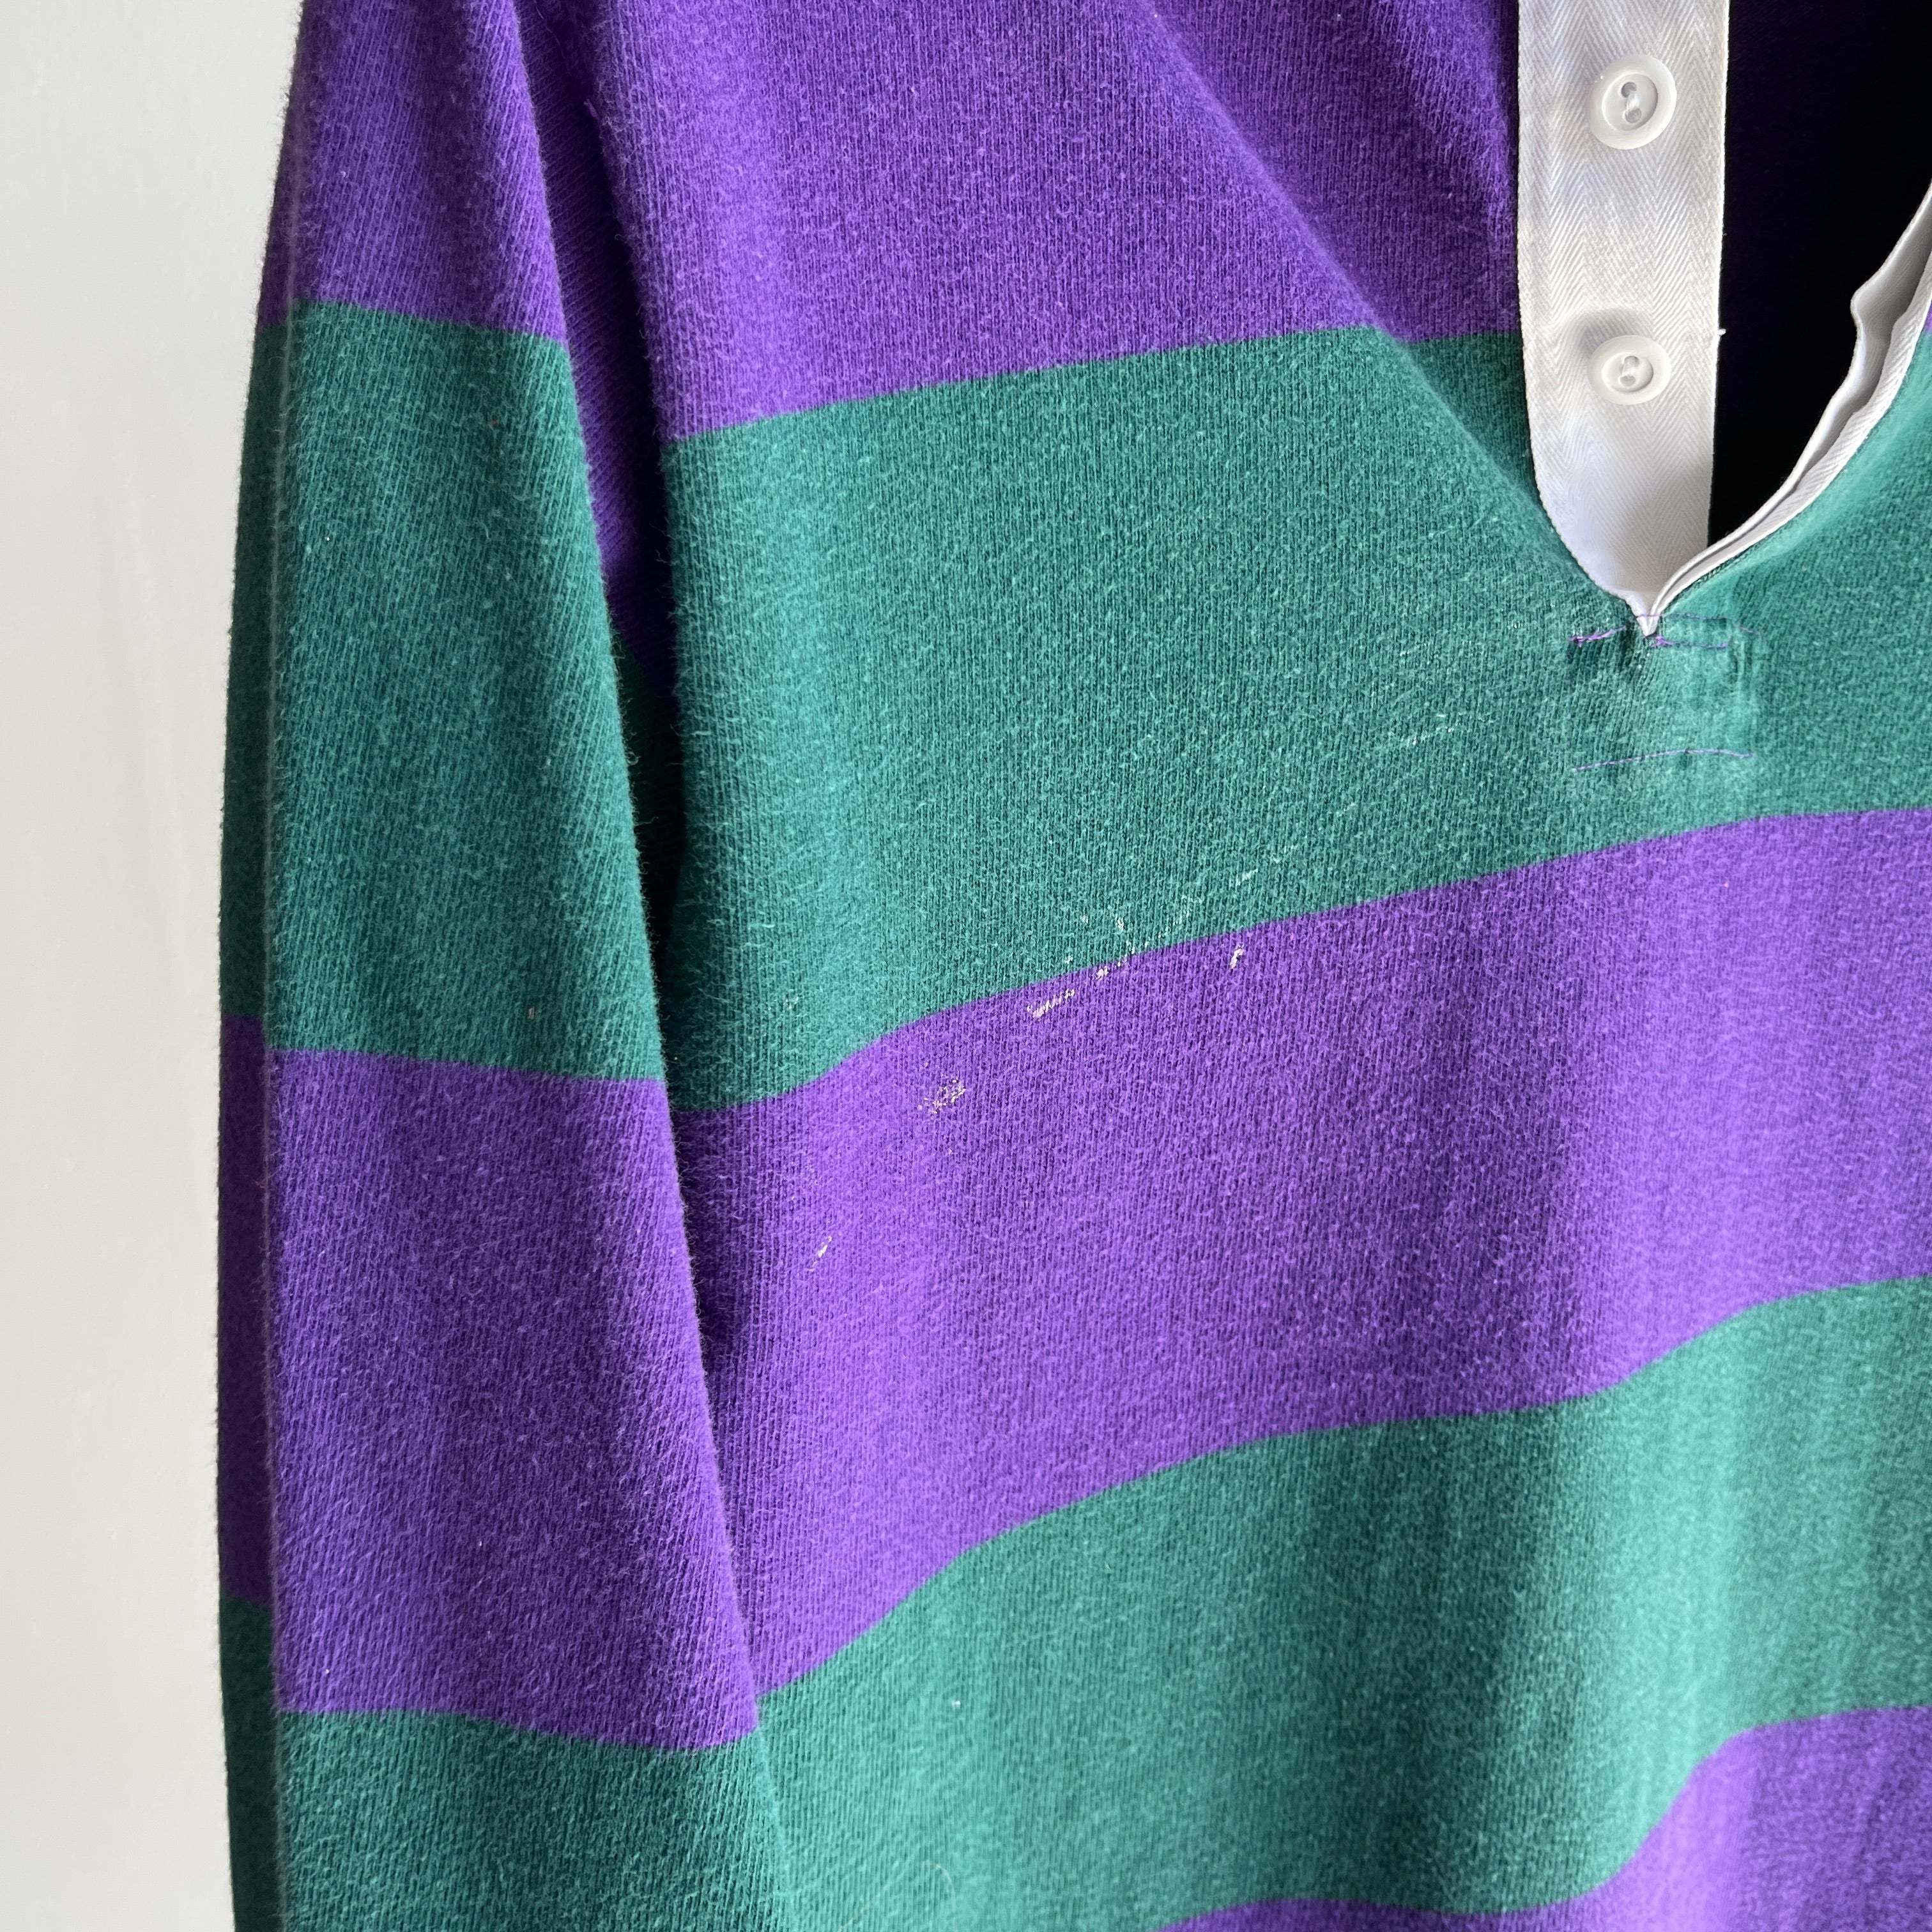 1980s USA Made Ralph Lauren Rugby Polo Long Sleeve Striped Shirt with Paint Stains